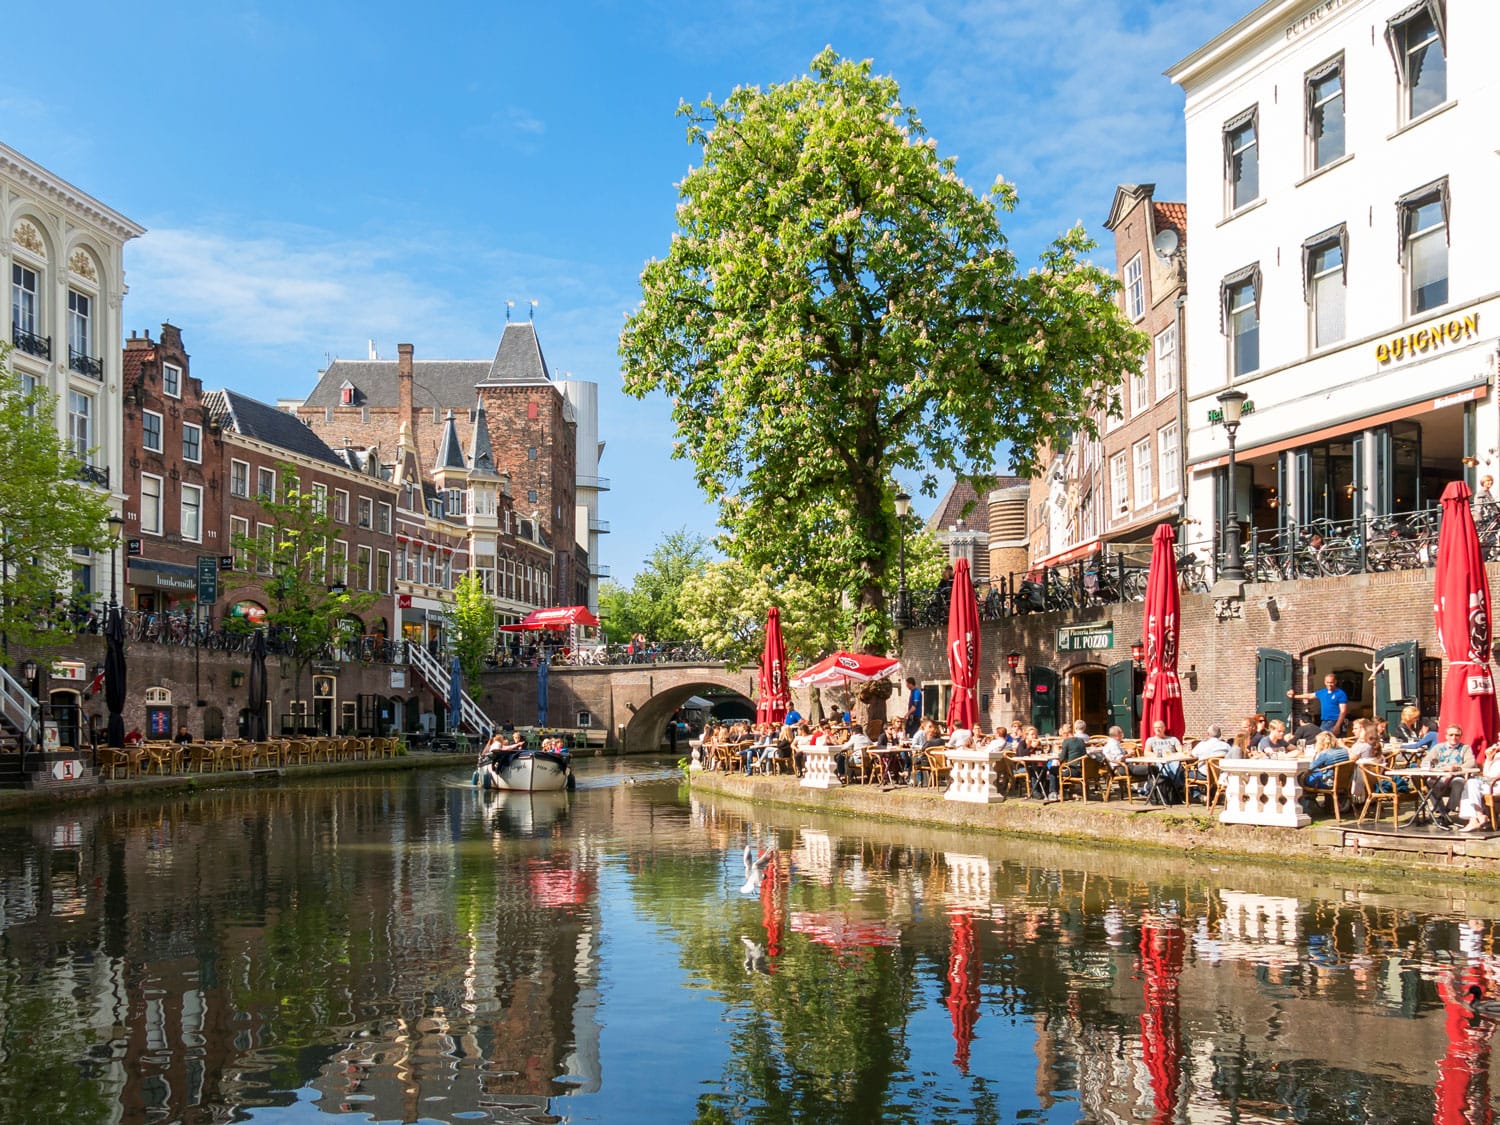 Oudaen Castle and people on outdoor terrace of restaurants alongside Oudegracht canal in the city of Utrecht, Netherlands